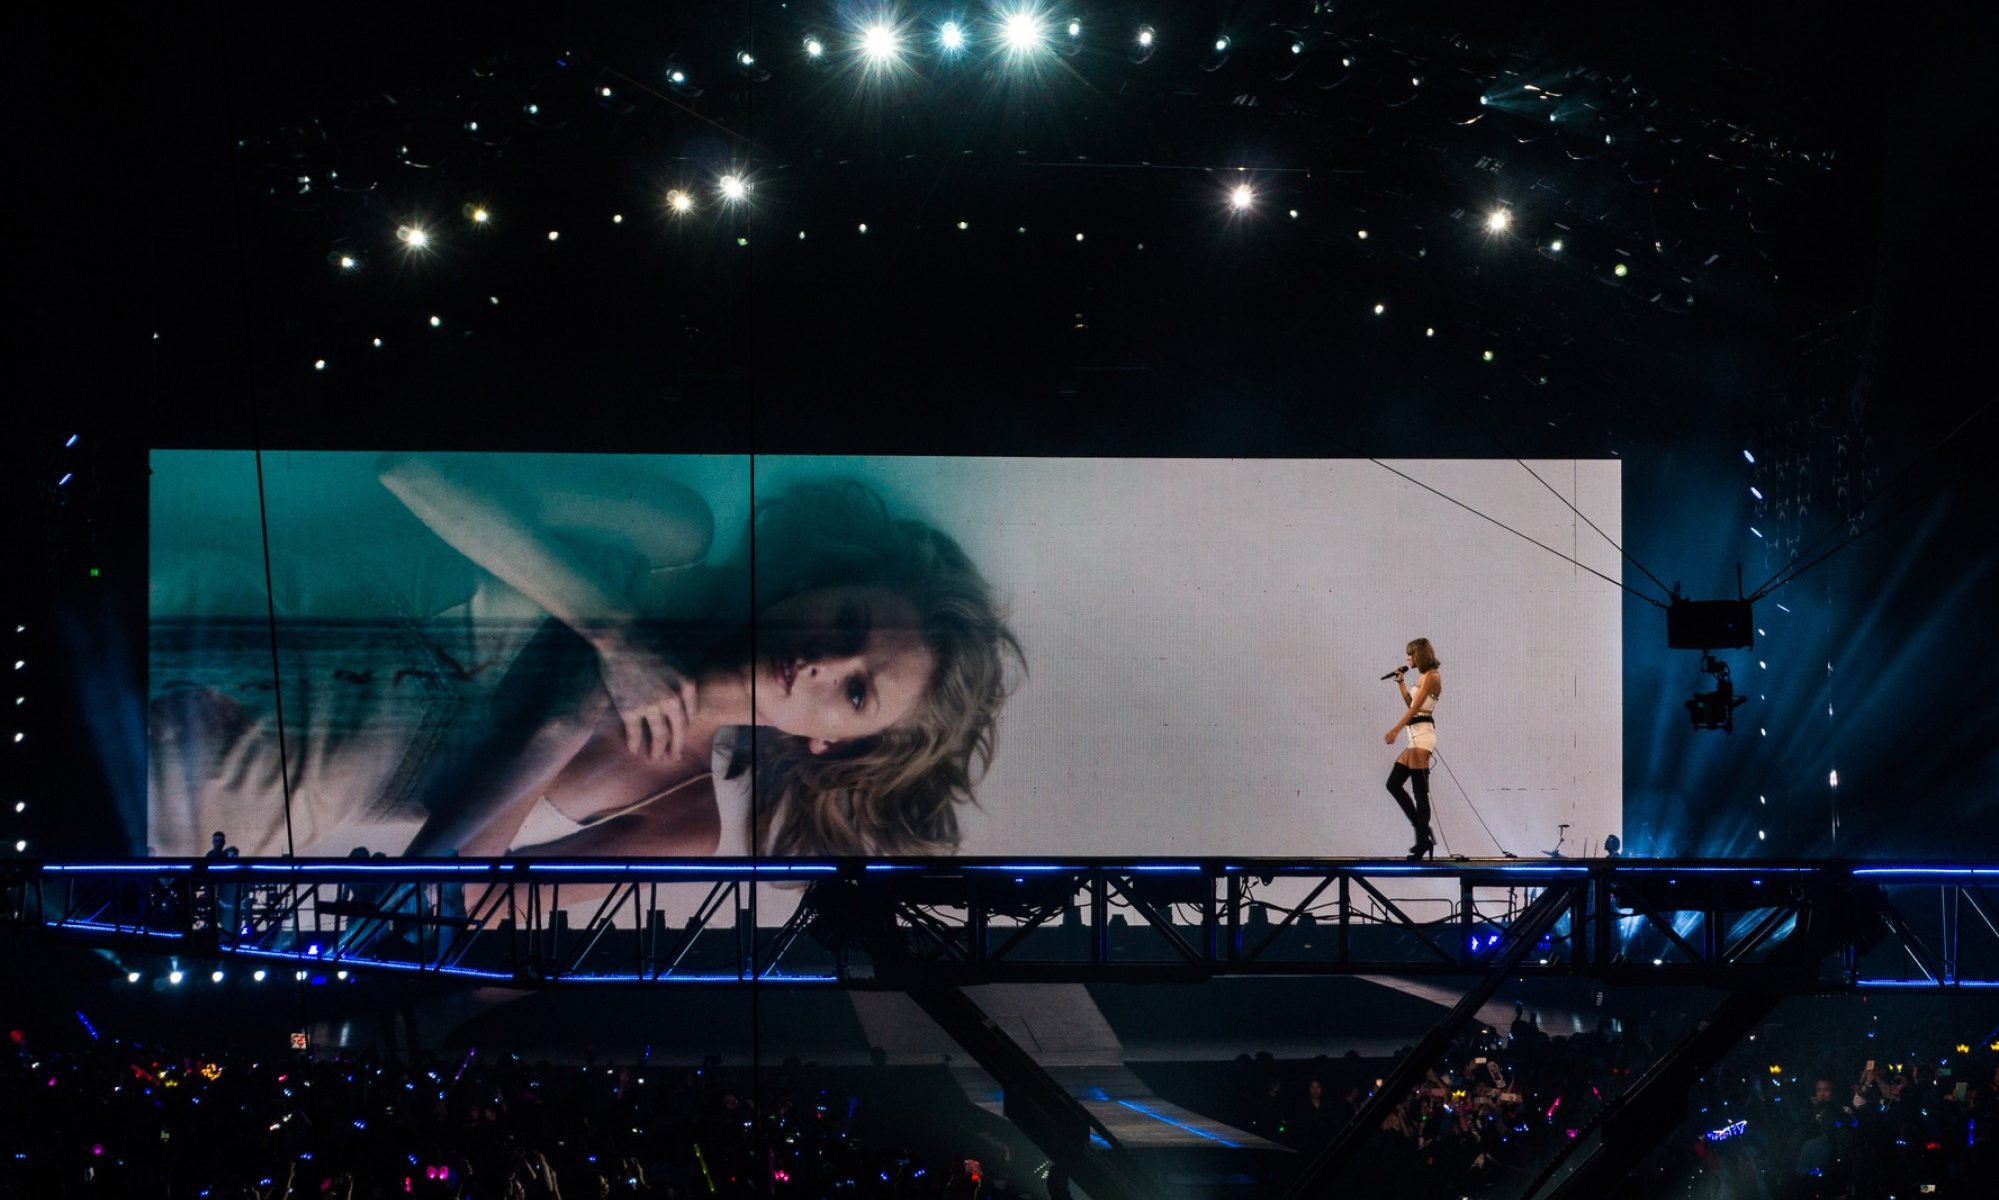 photograph of Taylor Swift performing on stage with image on screen in background